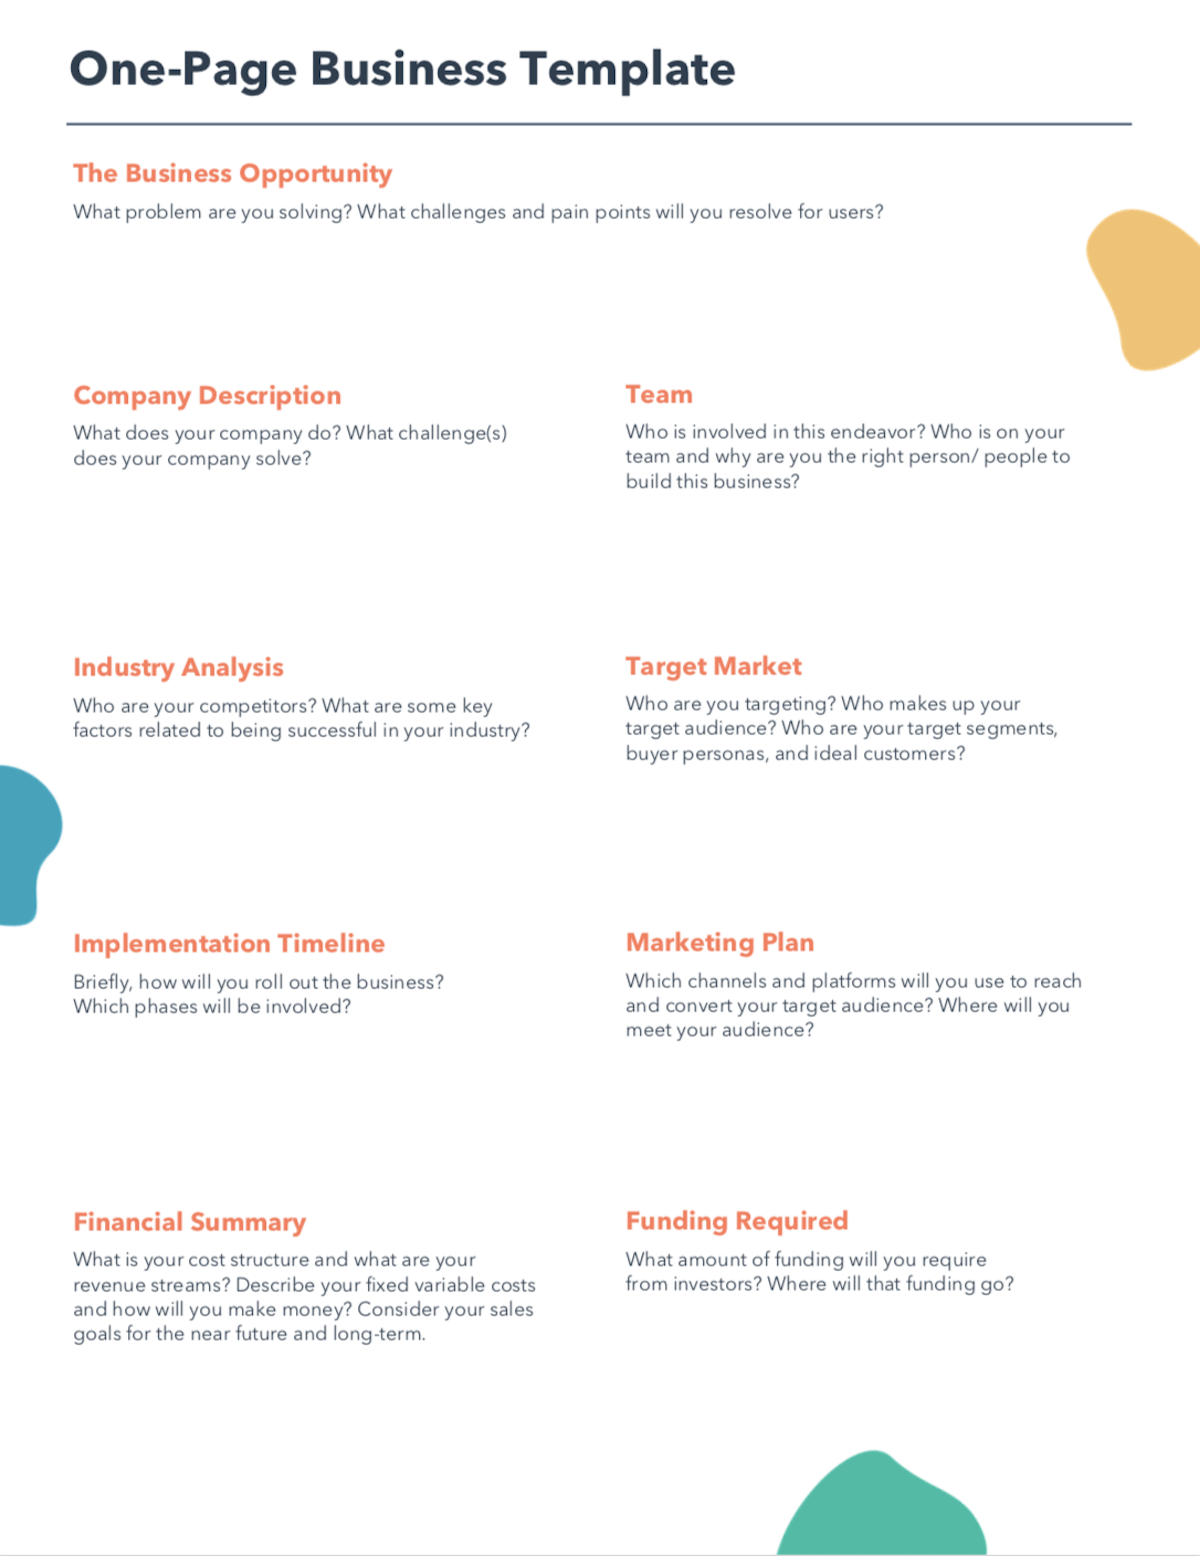 Free One Page Business Plan Template for PDF  Word  HubSpot With How To Write Business Profile Template